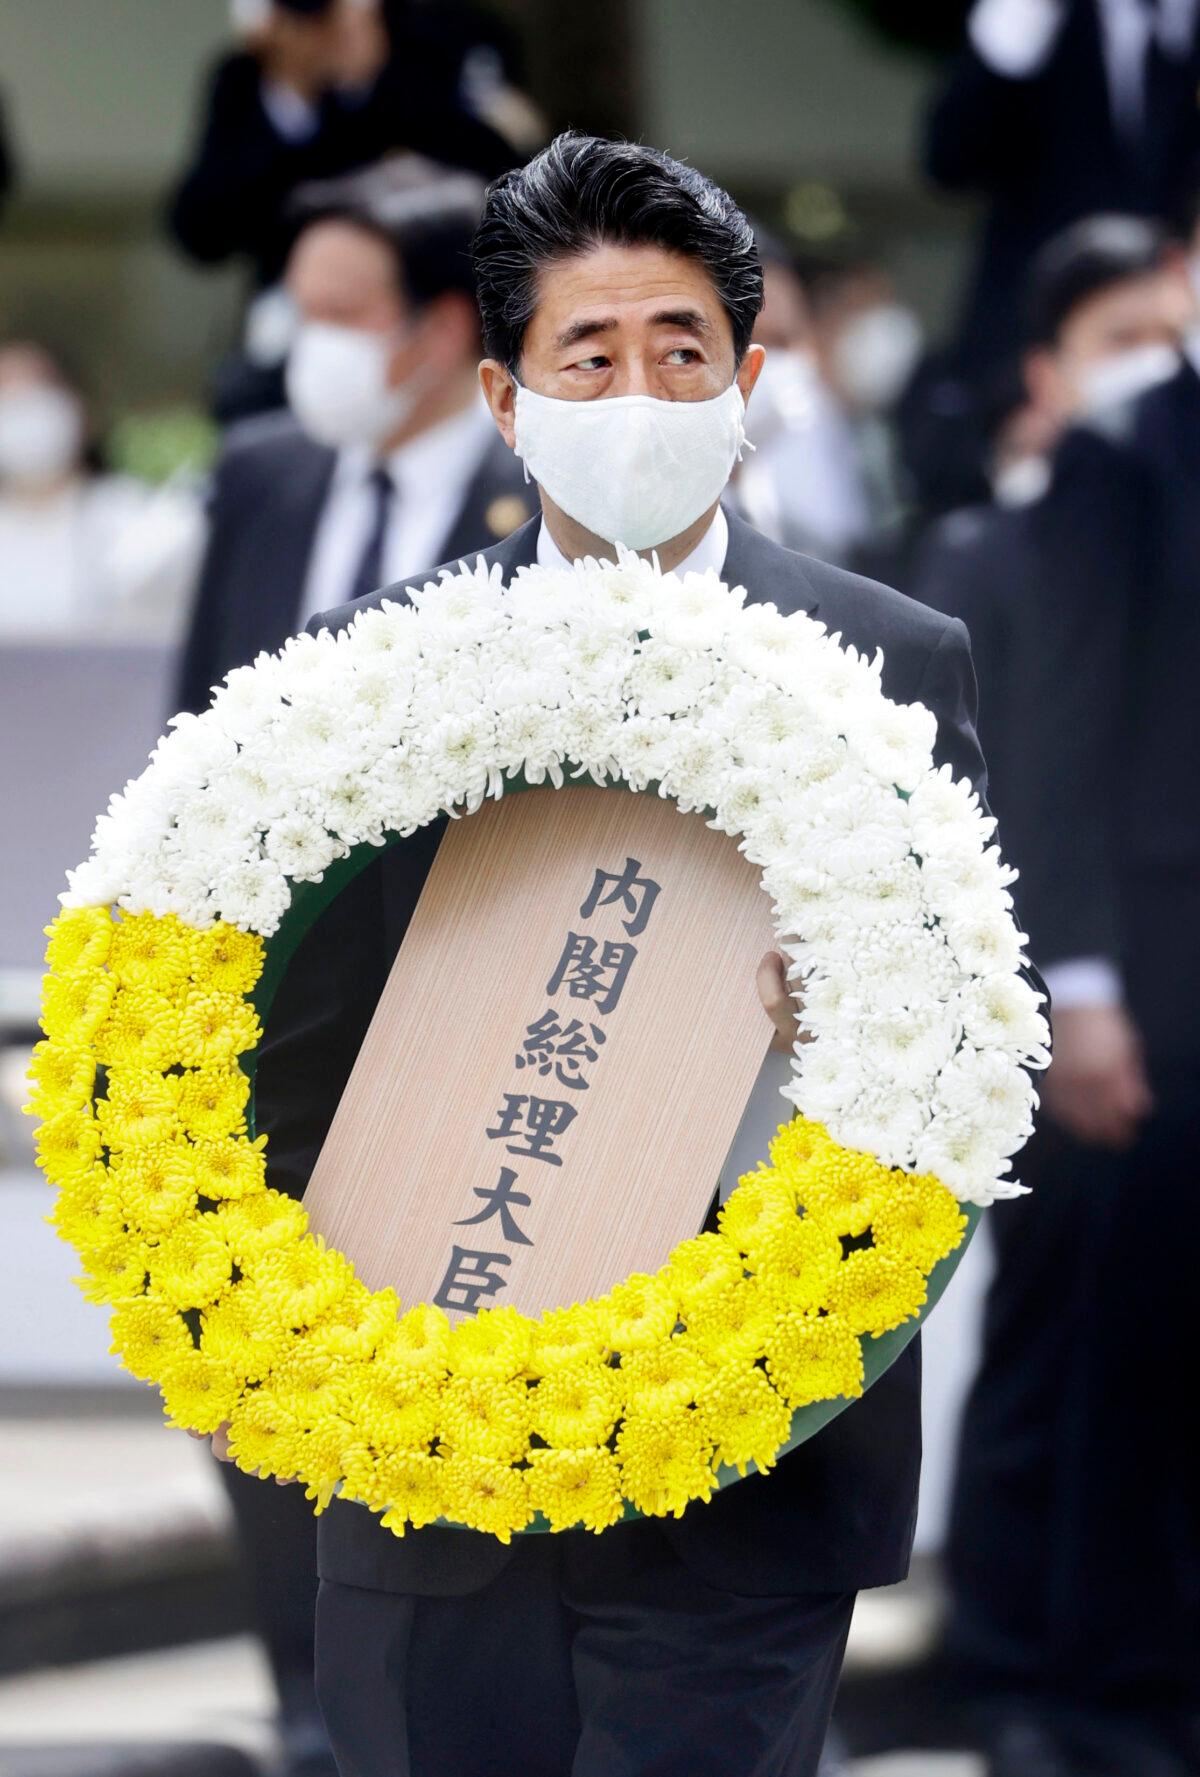 Japanese Prime Minister Shinzo Abe carries the wreath to offer during a ceremony to mark the 75th anniversary of the U.S. atomic bombing at the Peace Park in Nagasaki, southern Japan, on Aug. 9, 2020. (Kyodo News via AP)